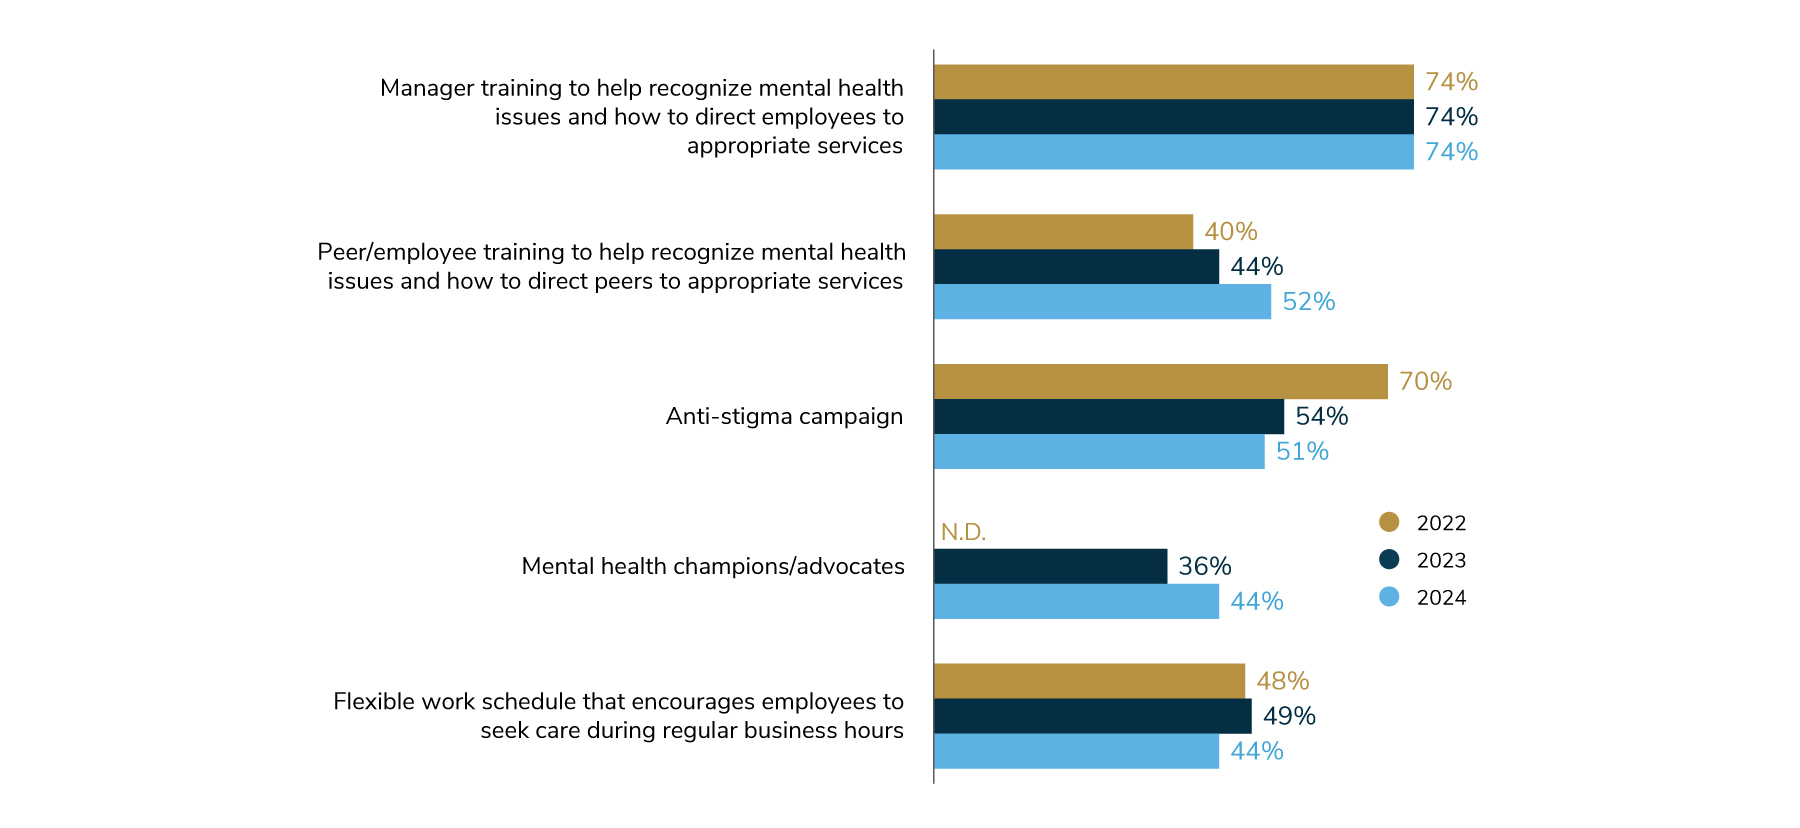 74% of employers offer manager trainings to help managers recognize mental health issues and how to direct employees to appropriate services. 52% (up from 44% in 2023) will offer peer/employee trainings in 2024. 51% will conduct anti-stigma campaigns in 2024, down from previous years. 44% will have mental health champions/advocates in 2024.
